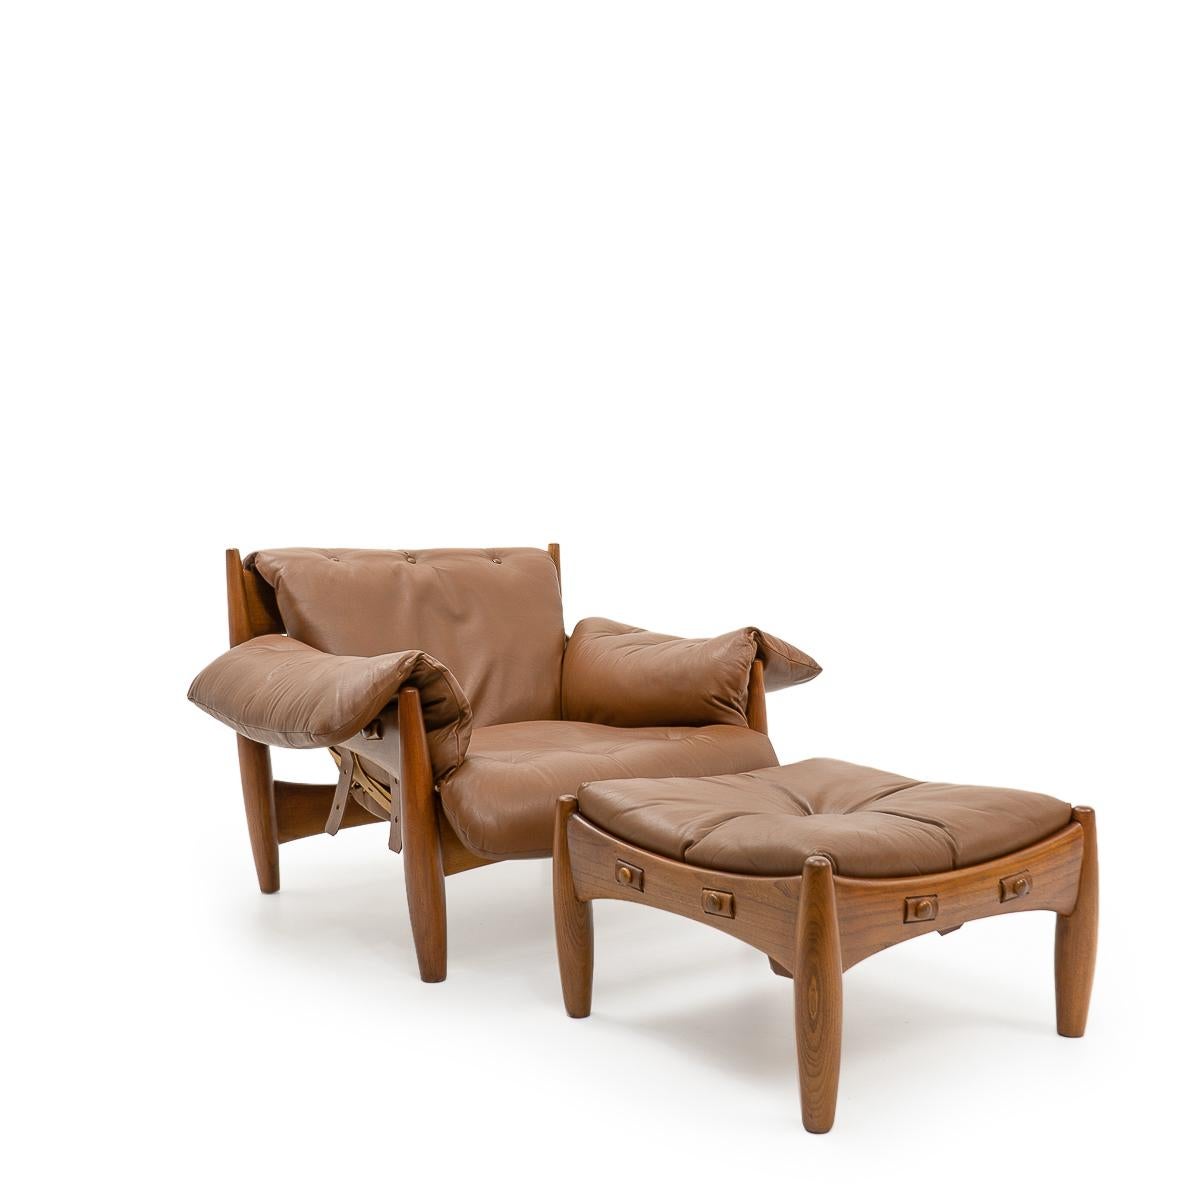 Sergio Rodrigues set the standard for Modern furniture in Brazil during the 1950s. His works have become a reference for Brazilian design, which often use indigenous wood species such as jacaranda and imbuia. 

Probably his best known design is